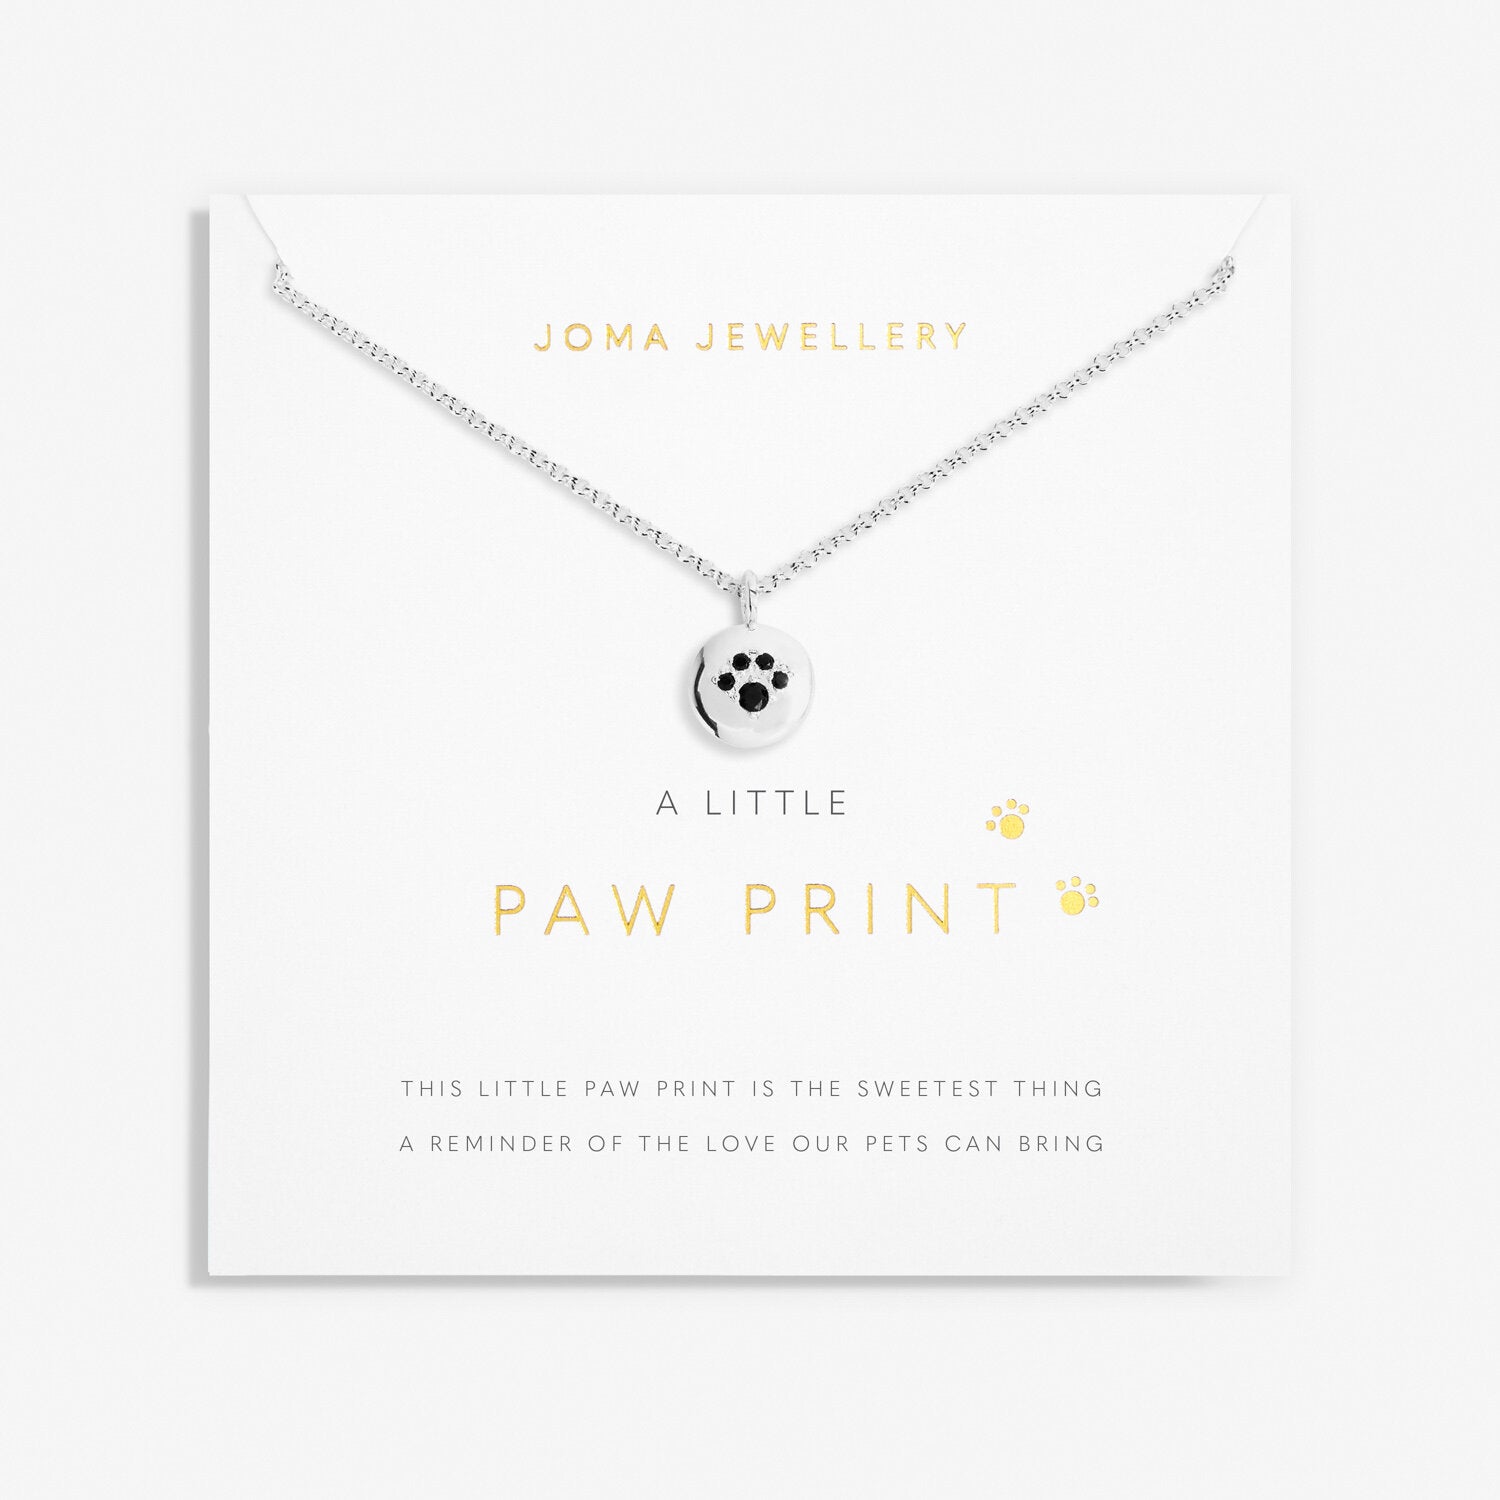 Joma Jewellery A Little 'Paw Print' Necklace |More Than Just A Gift